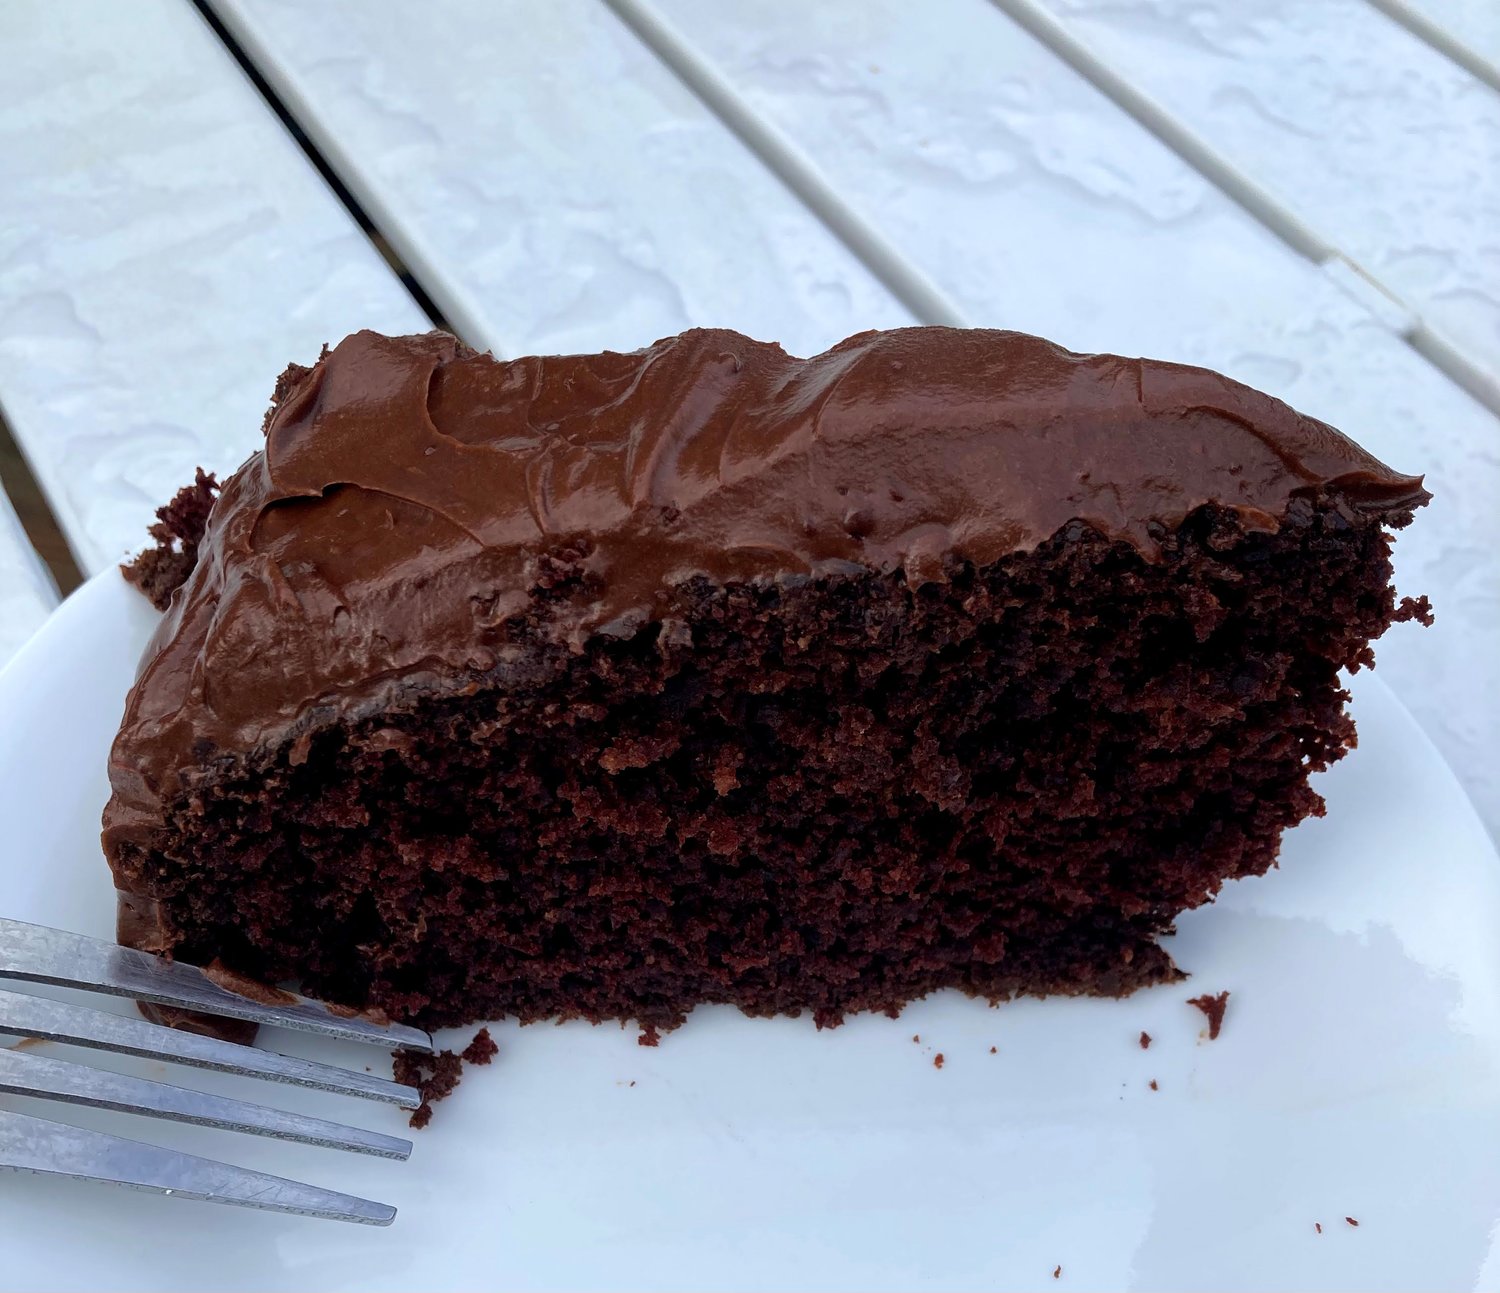 This delicious chocolate cake is easy to make and great for weekend get togethers.